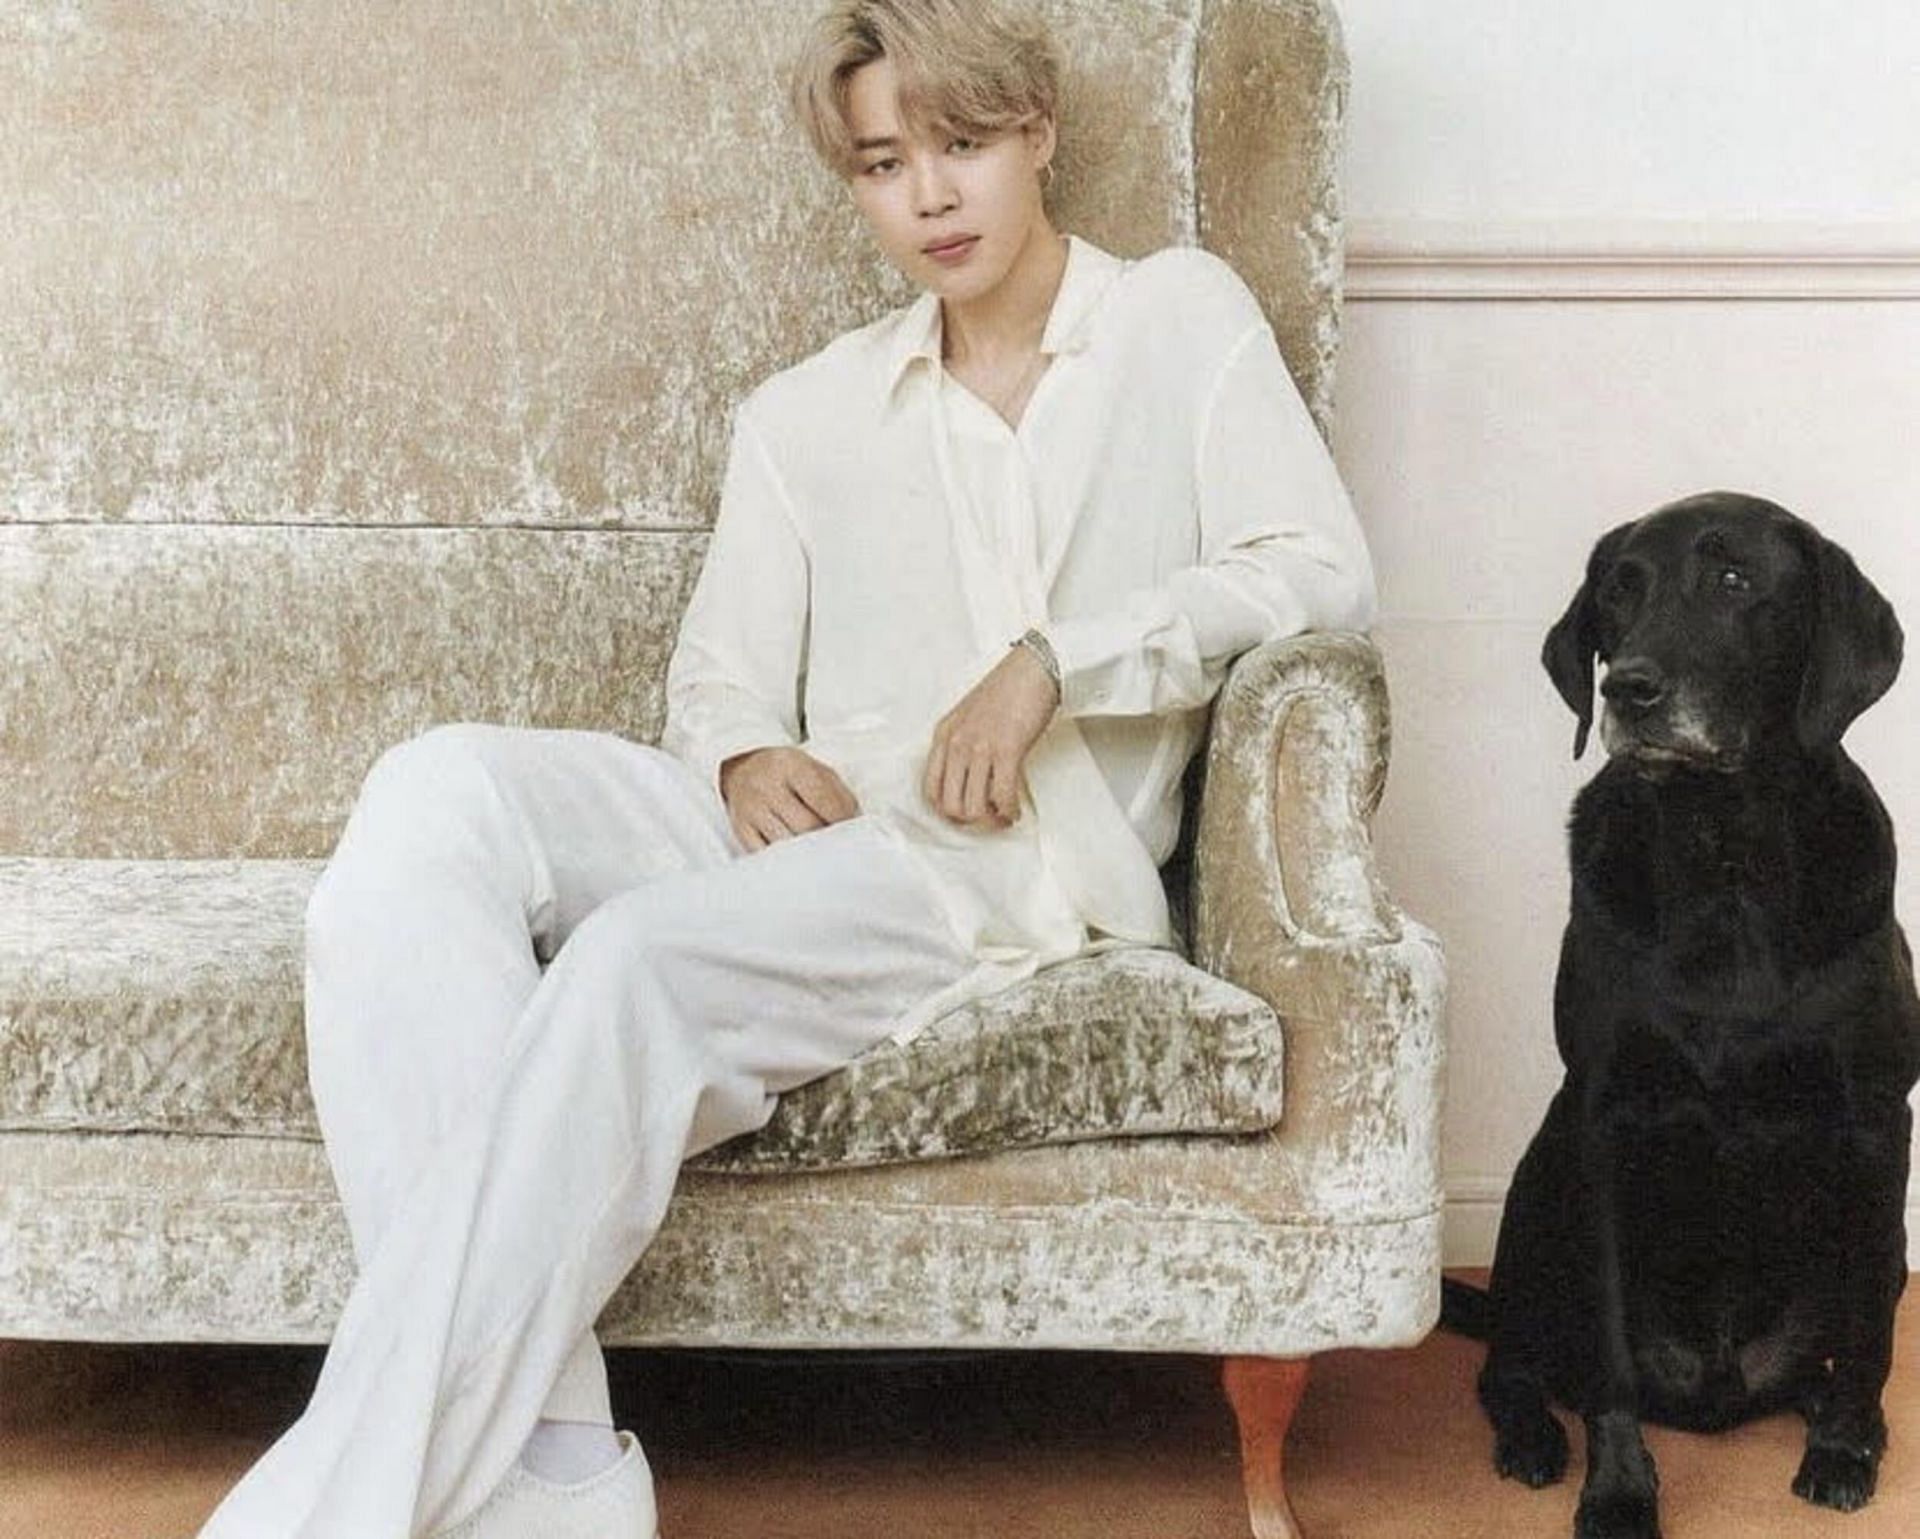 BTS’ Jimin crowned the most-loved K-pop idol in The Netizens Report 2021 year-end issue